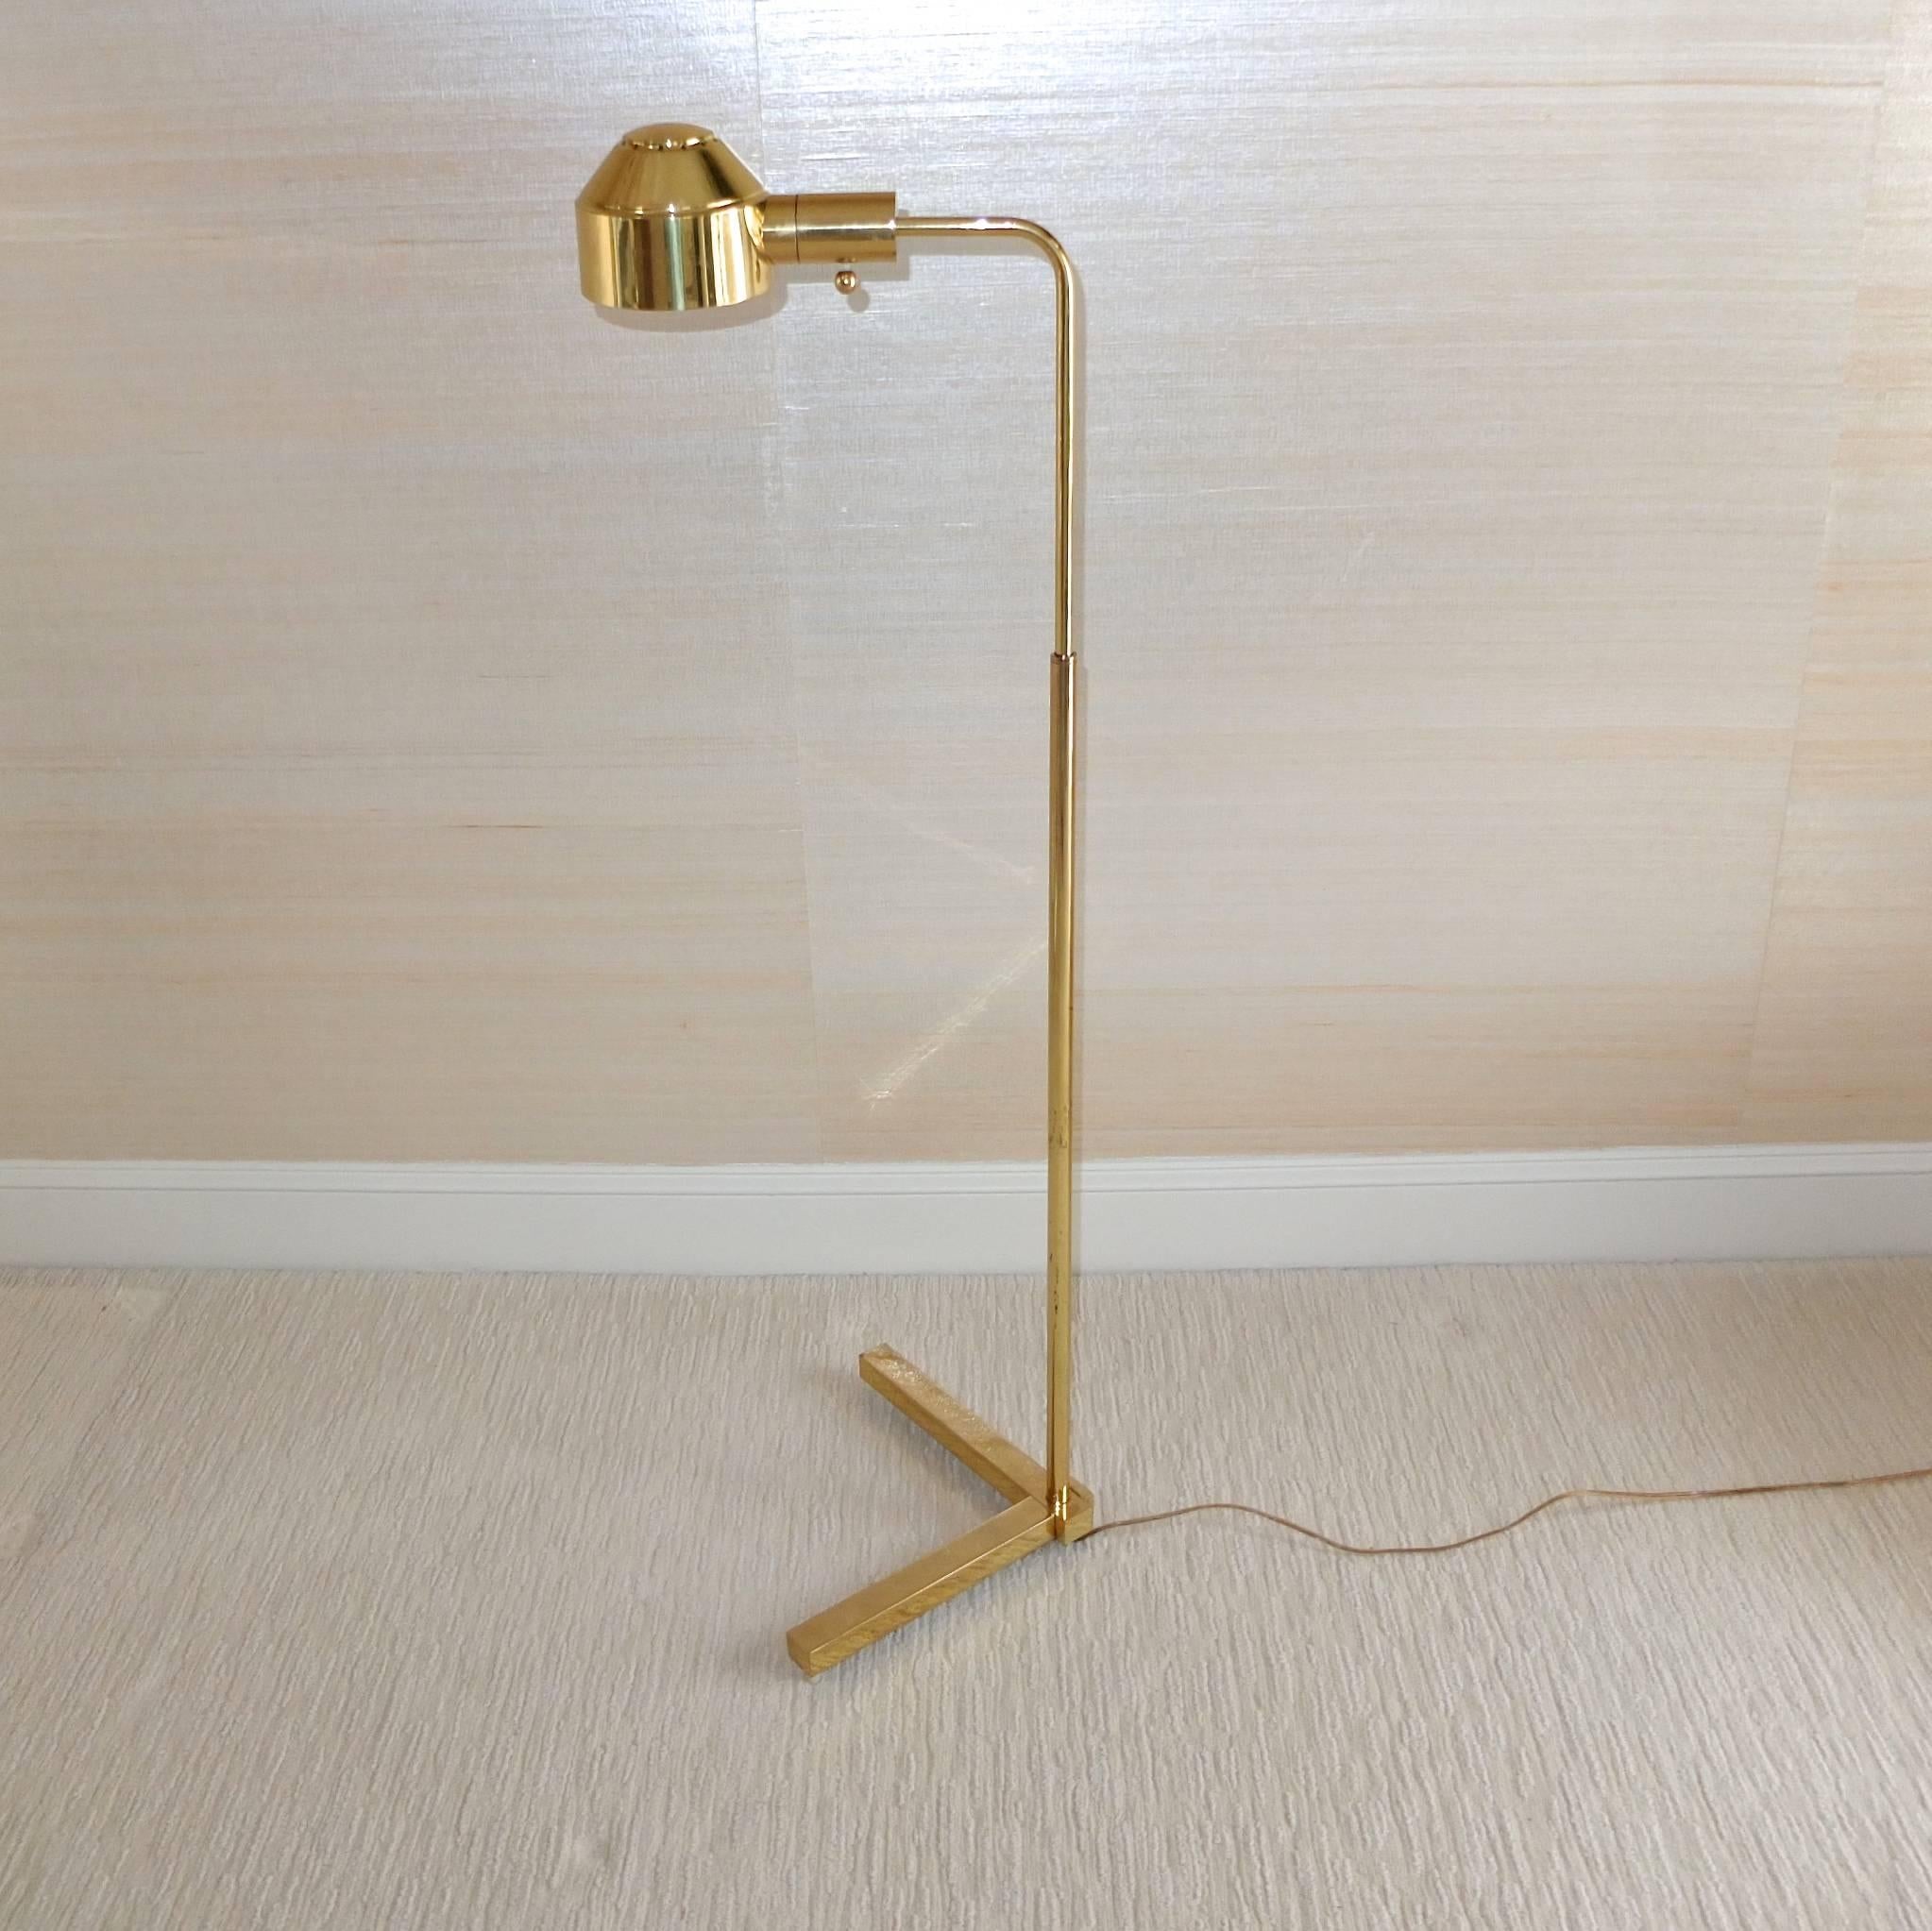 Vintage 1970s E. F. Chapman brass floor lamp. Pharmacy style with telescoping tubular stem on heavy solid brass V-Form base with rotating brass shade.

This lamp was produced back when Chapman's factory was in Avon, MA so the quality is of a much